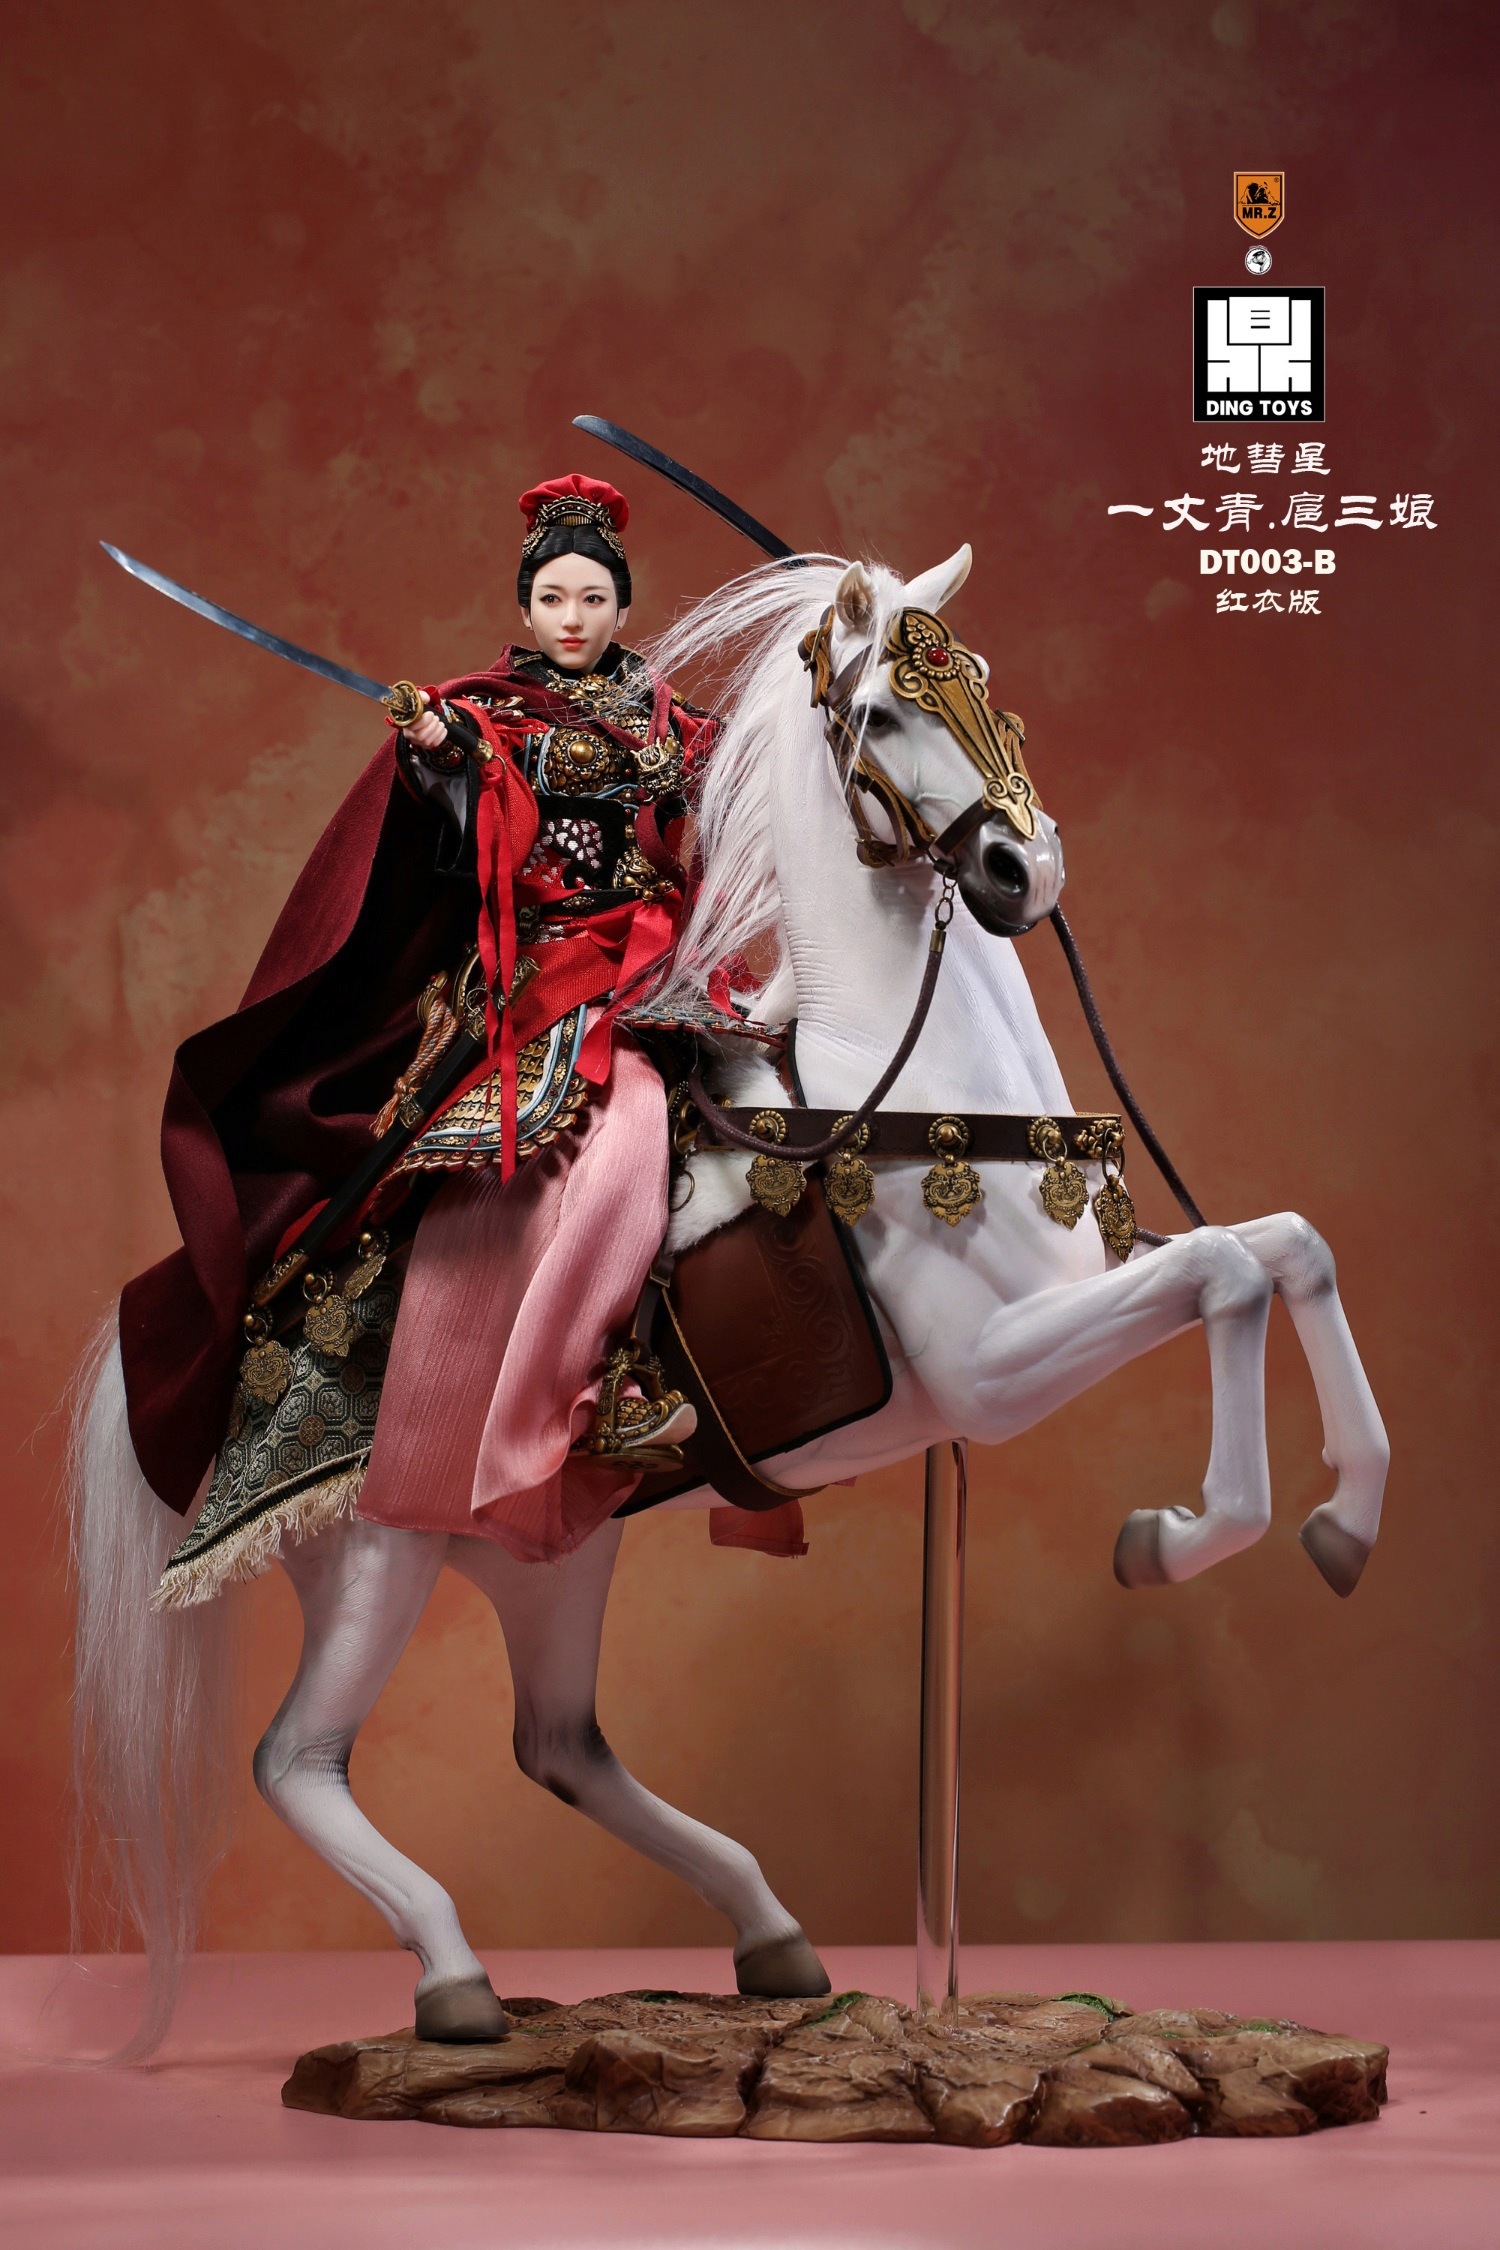 MrZ - NEW PRODUCT: Mr.Z x Ding Toys DT003 1/6 Scale 《Water Margin》Shiying Zhang (Green and Red versions), Horse (White) 4321